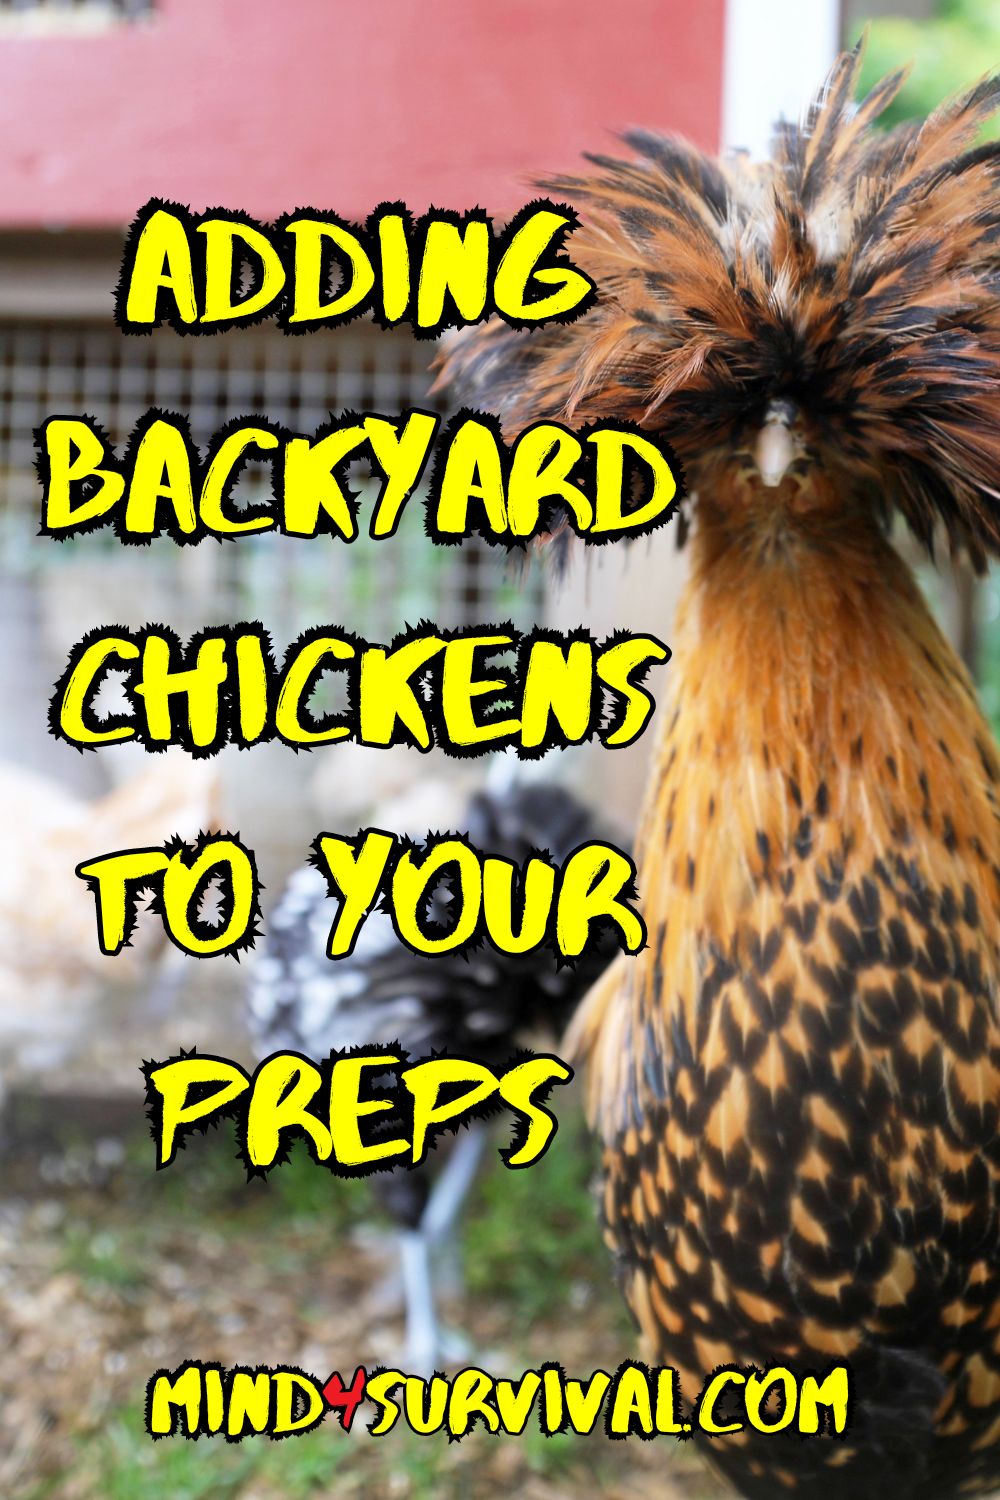 Poultry Primer: Adding Backyard Chickens to Your Preps